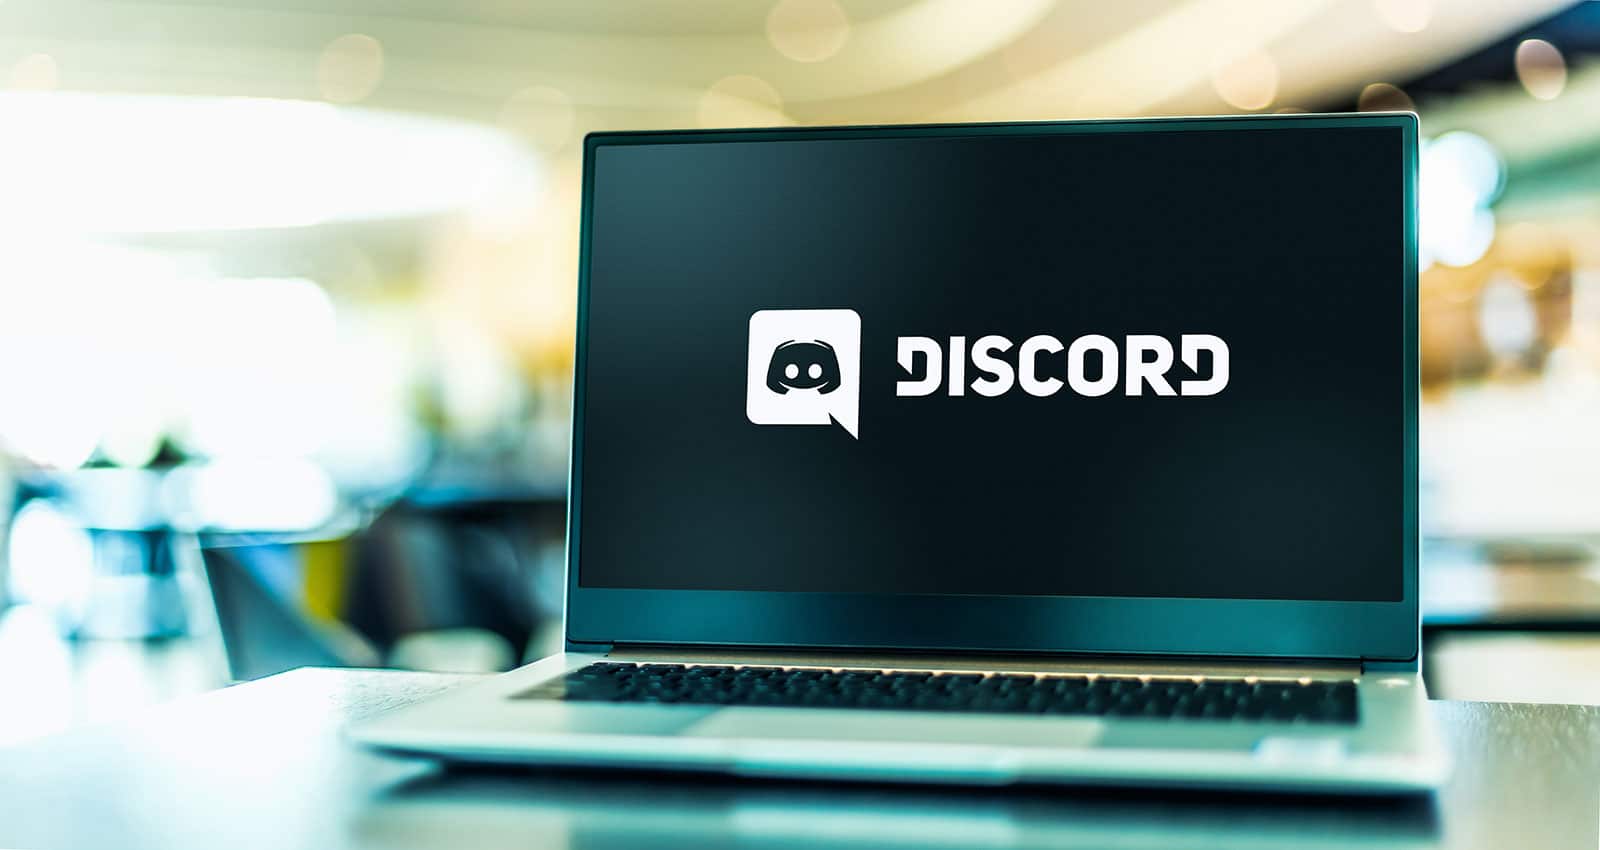 A Marketer’s Guide to Discord: How the Platform Can Help Grow Your Business